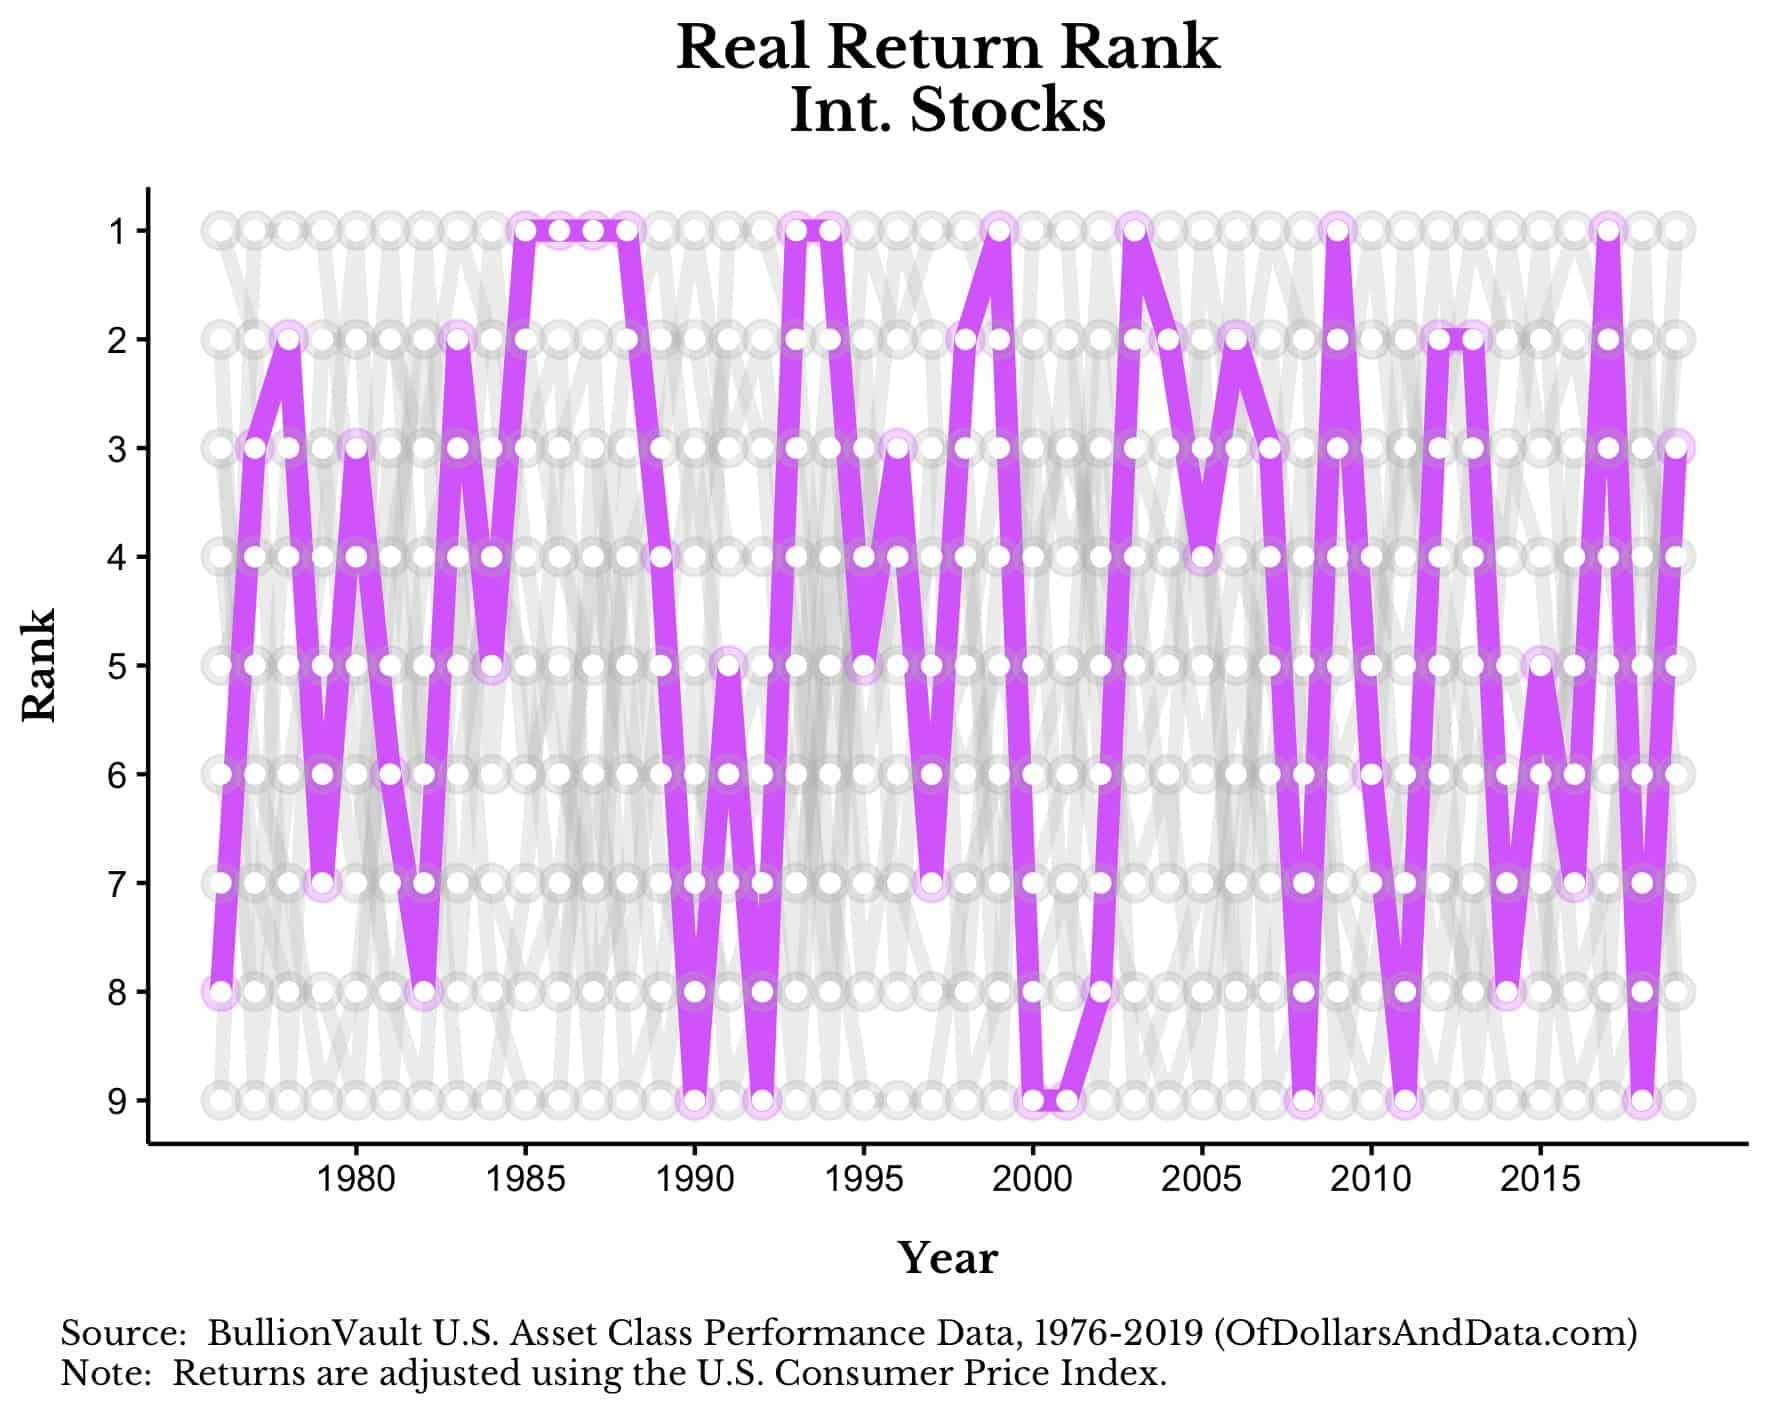 Real return rank by year for international stocks.